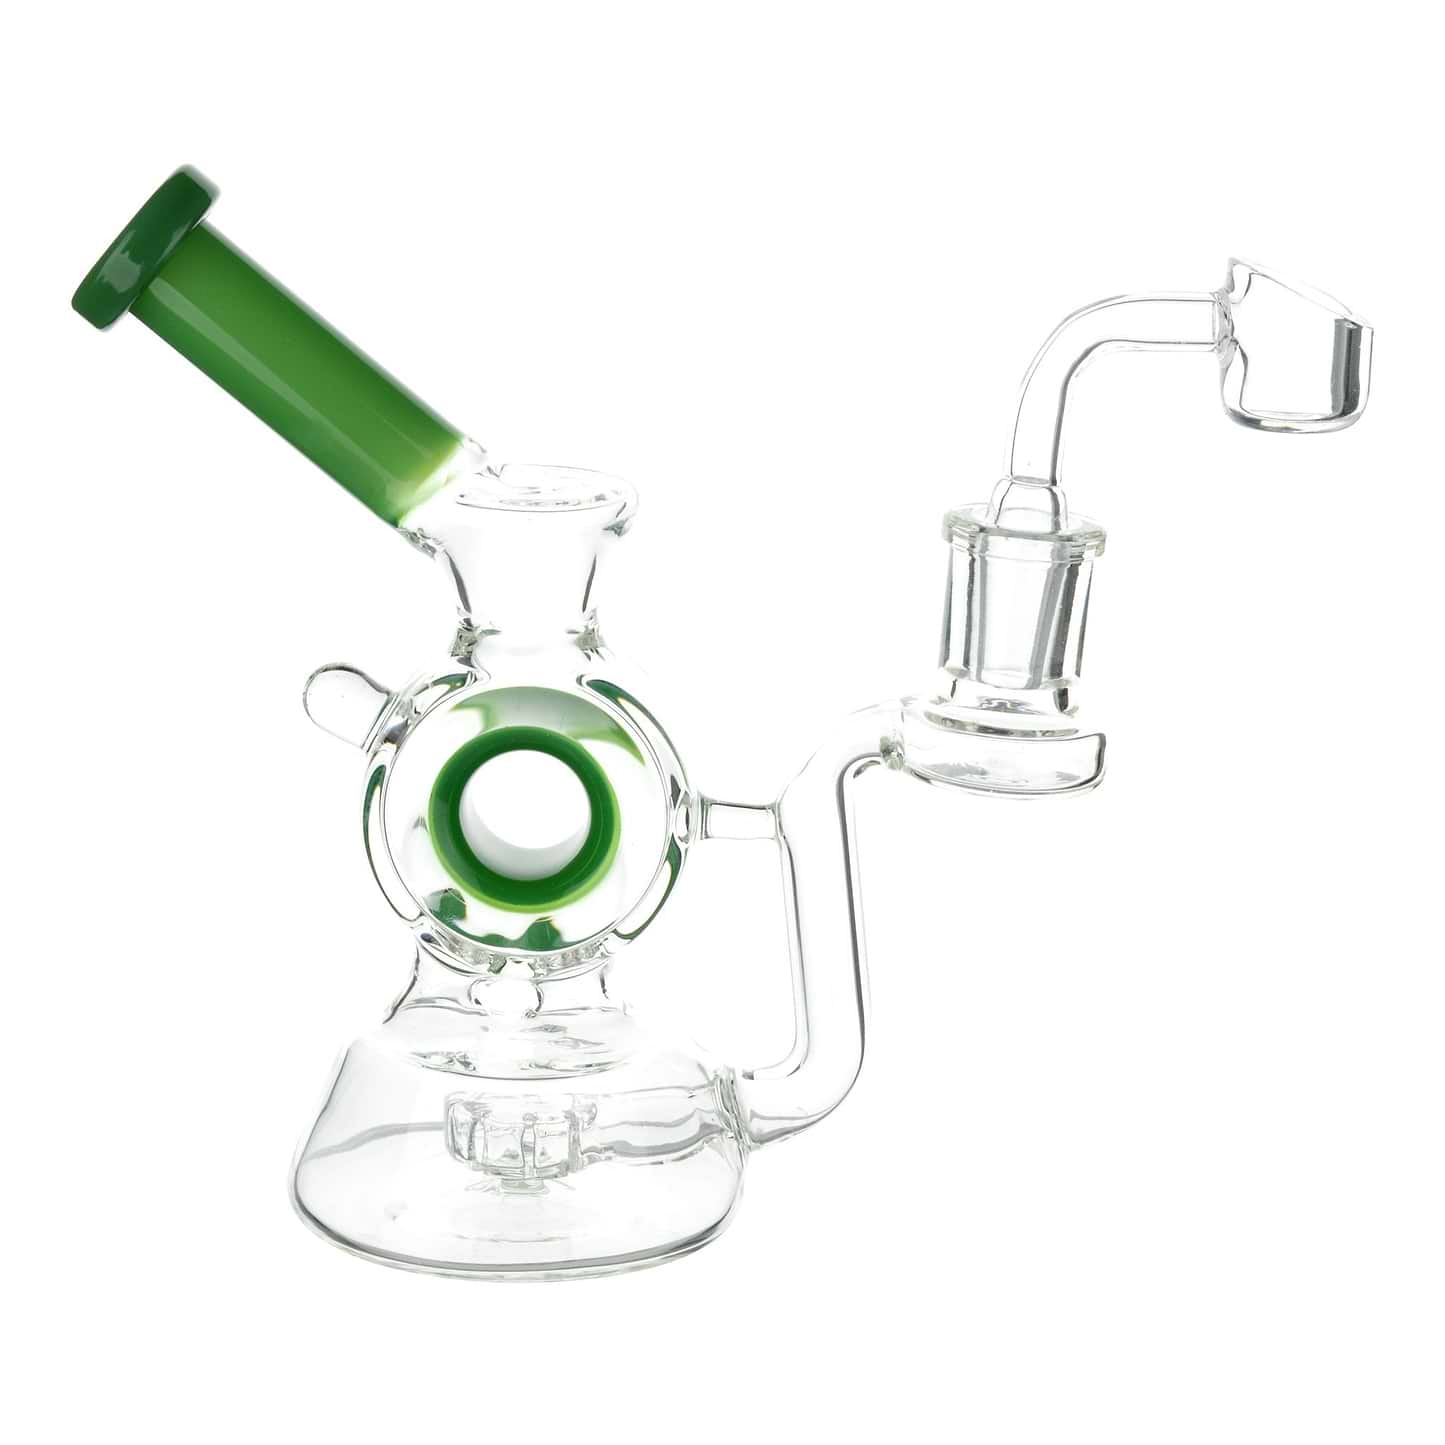 Full shot of 6-inch clear glass bong with donut perc green accent and green mouthpiece on left banger on right